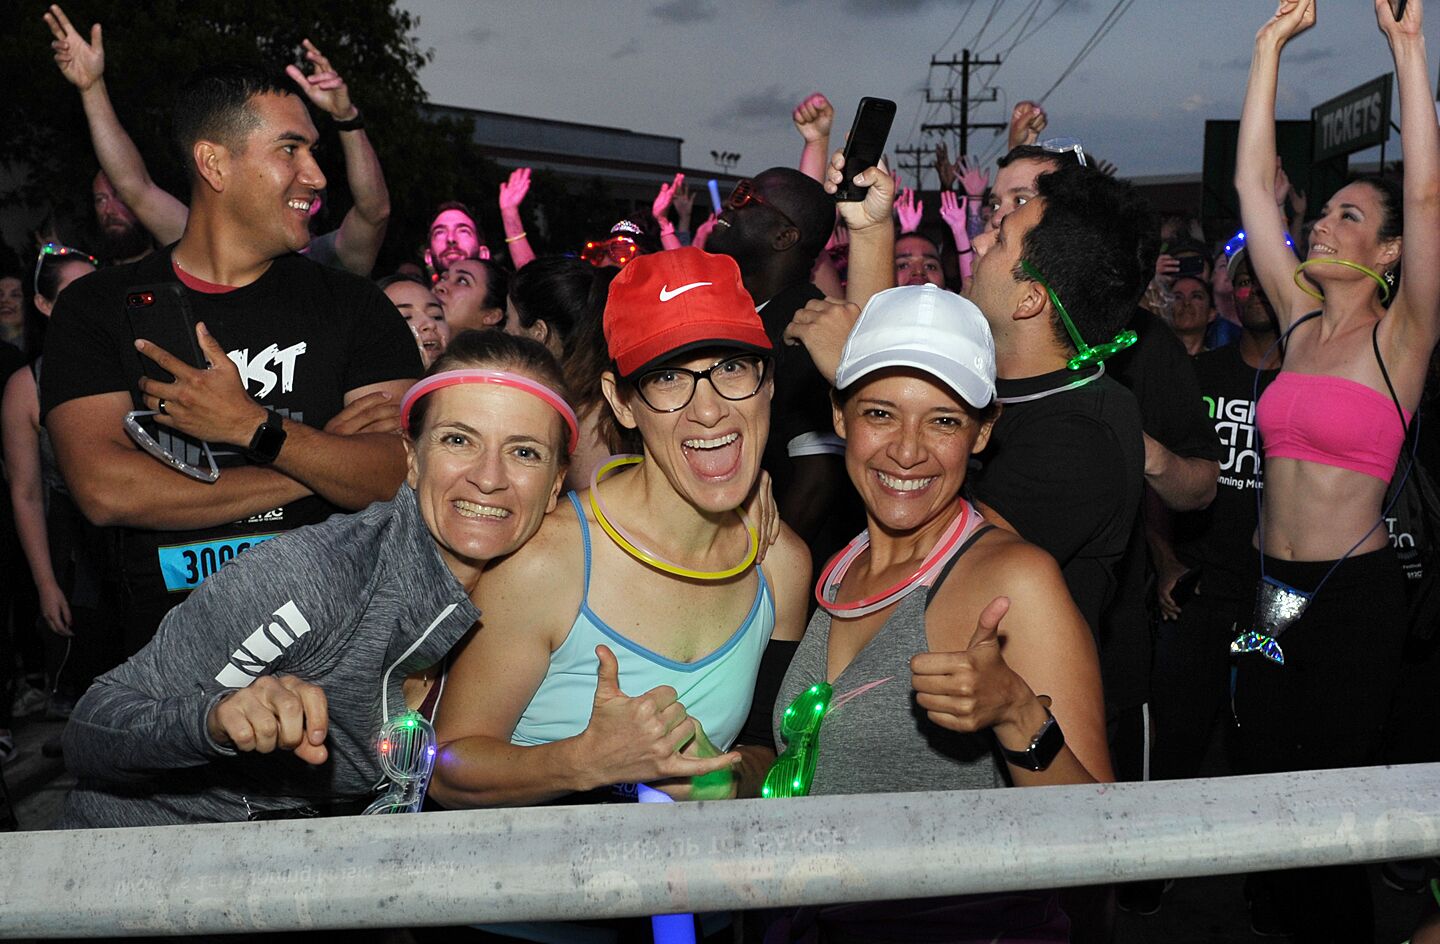 Billed as "the world's first running music festival," runners at the Night Nation Run at the Del Mar Fairgrounds experienced a music-filled course with DJs, light shows and more on Saturday, May 11, 2019.